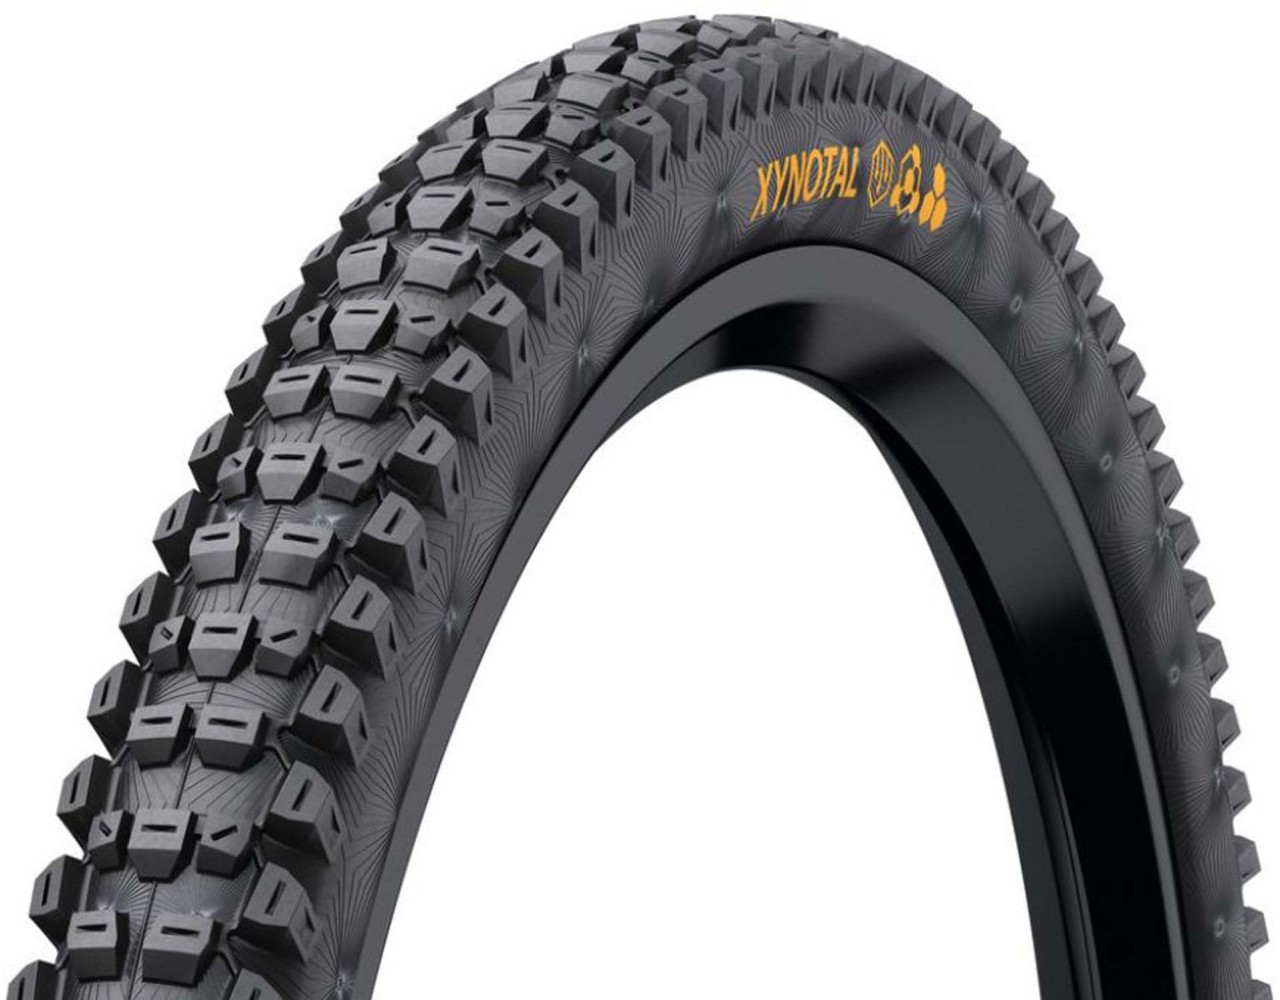 Continental Reifen Xynotal 29 x 2,40 Soft-Compound Downhill-Casing